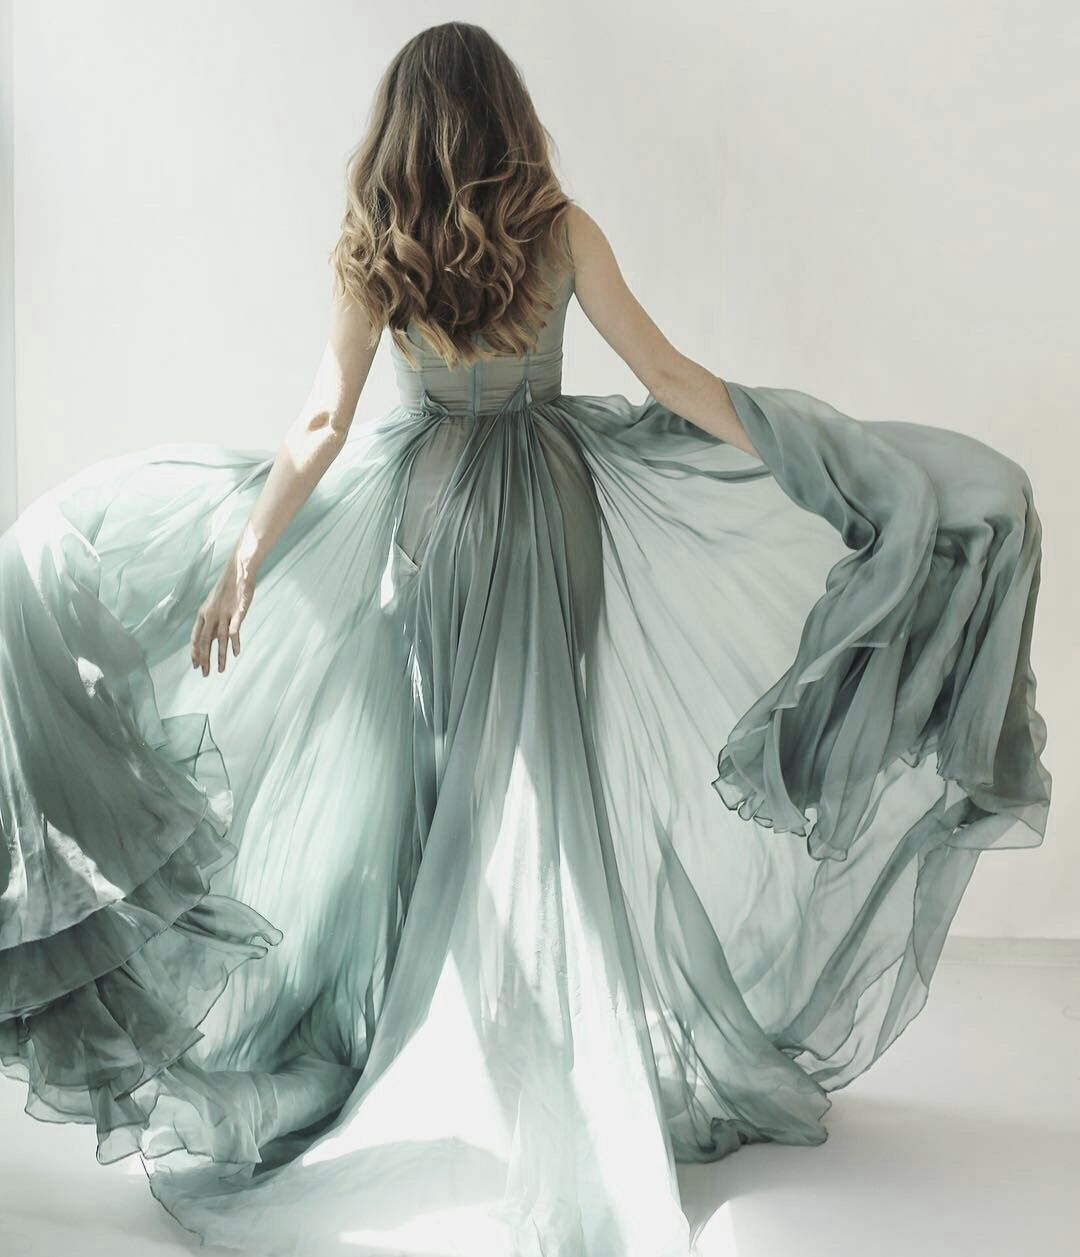 Colorful hand-dyed wedding dresses